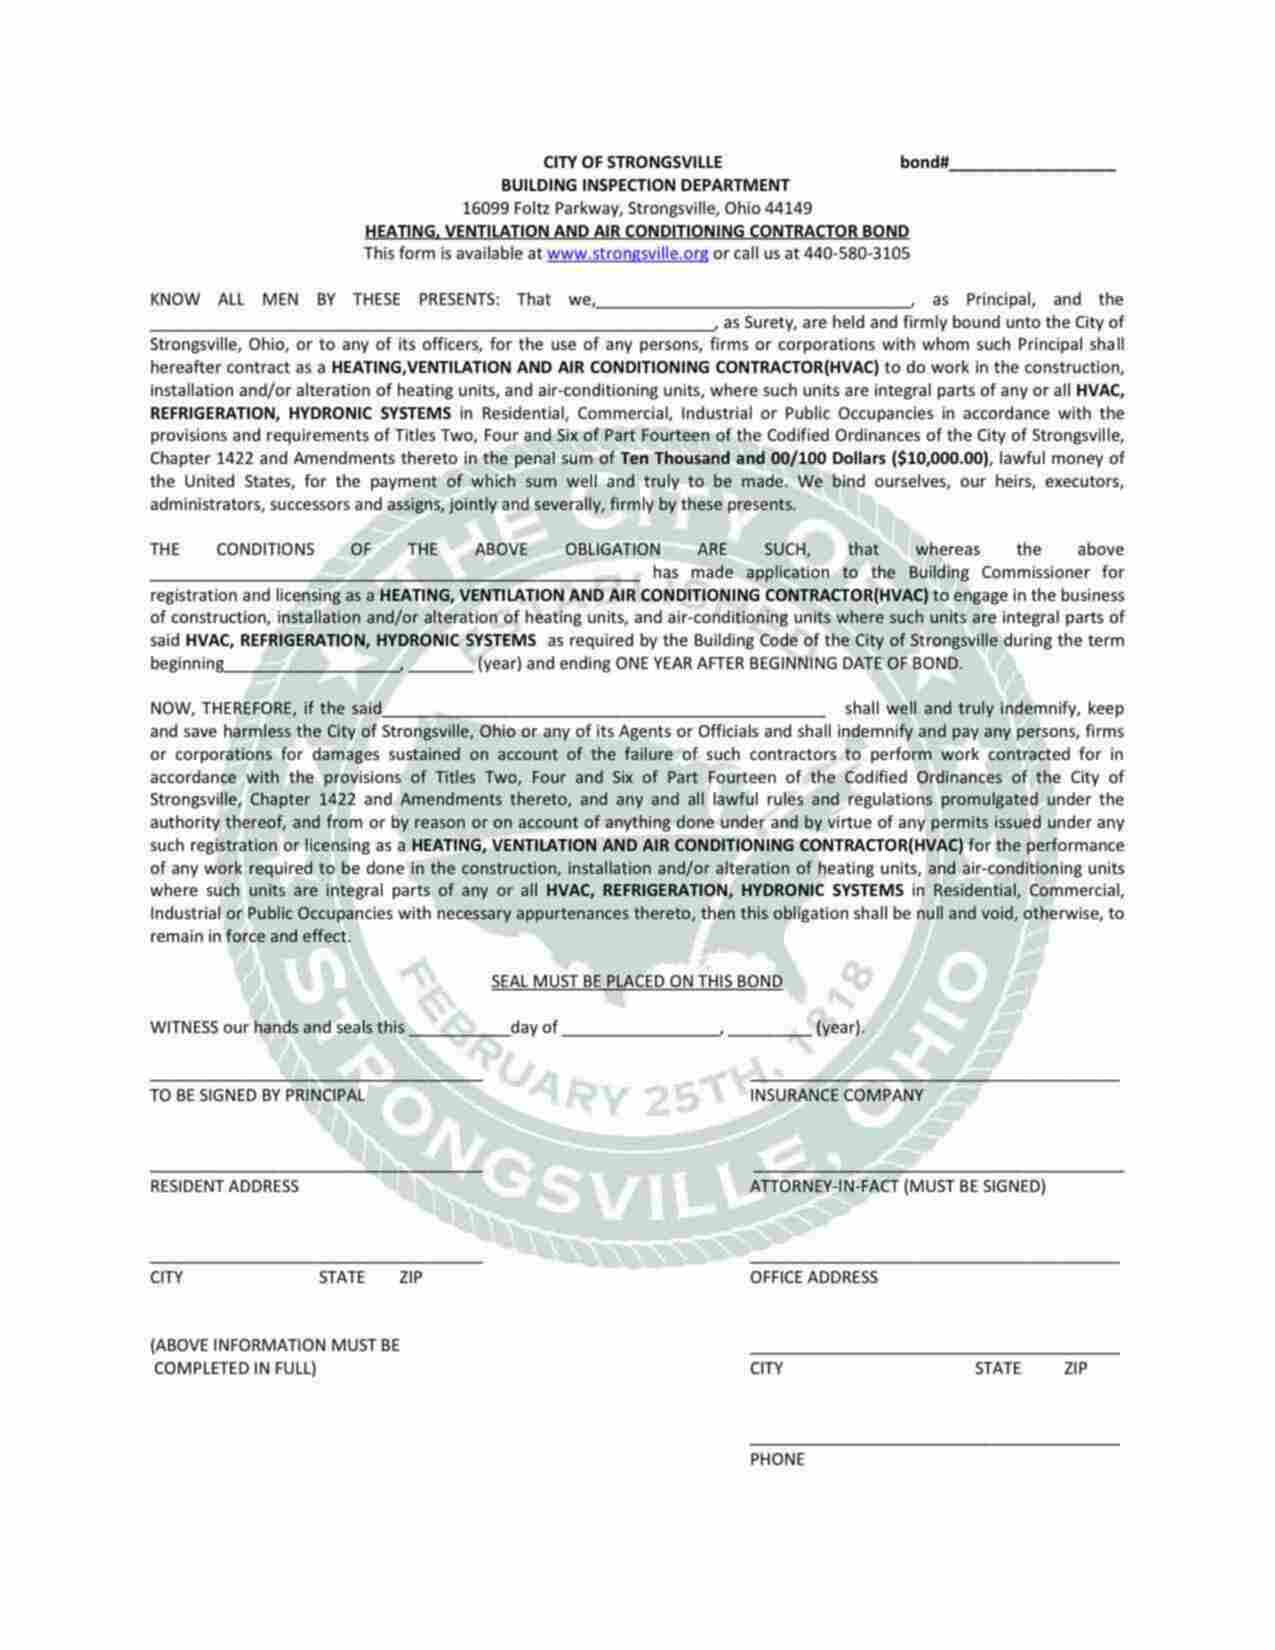 Ohio Heating, Ventilation and Air Conditioning (HVAC) Contractor Bond Form